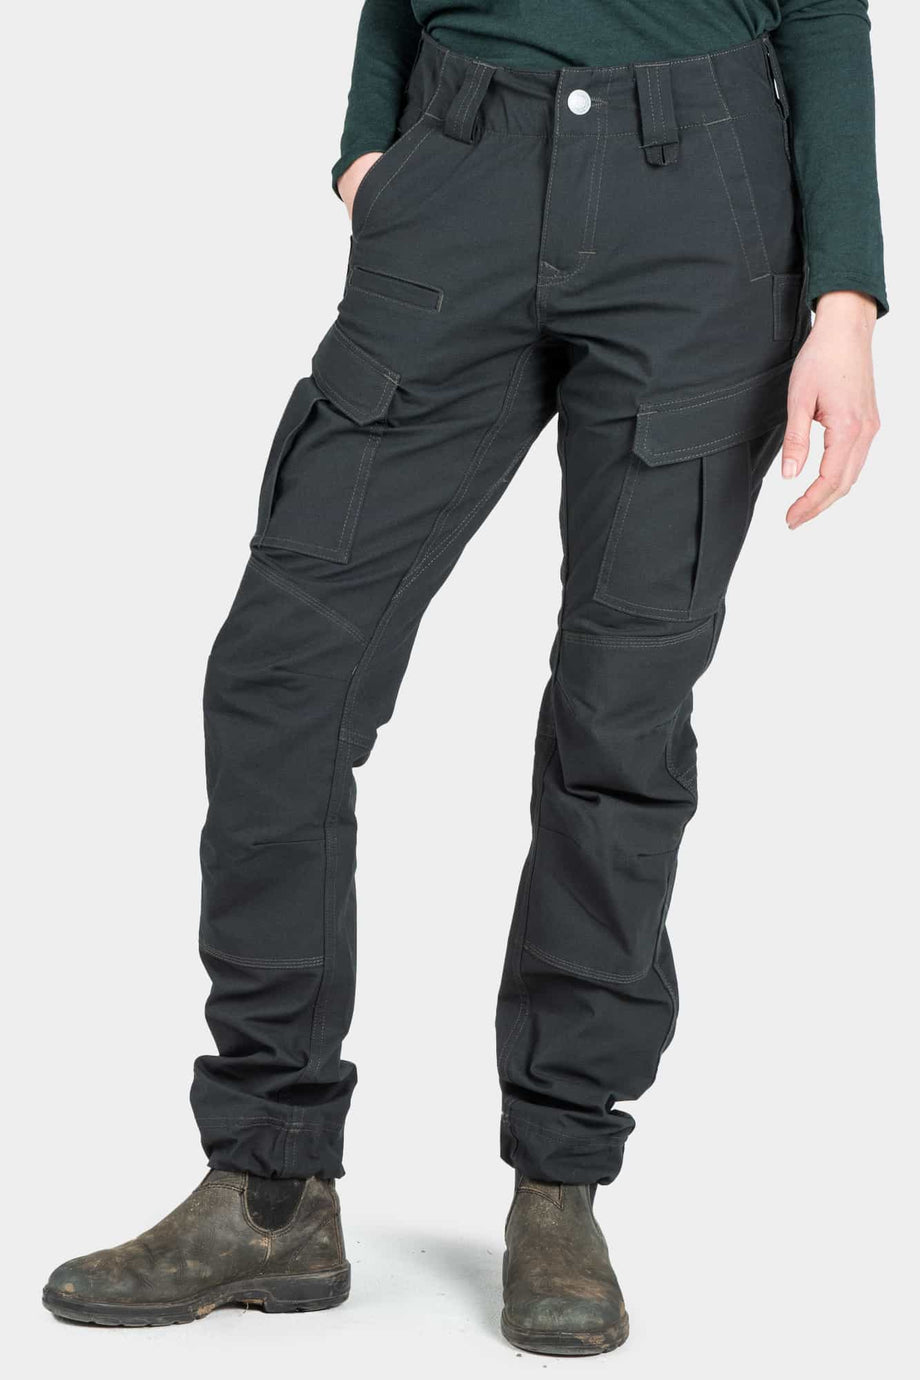 Buy CQR Mens Tactical Pants Water Repellent Ripstop Cargo Pants  Lightweight EDC Hiking Work Pants Outdoor Apparel Duratex Ripstop Black  32W x 30L at Amazonin